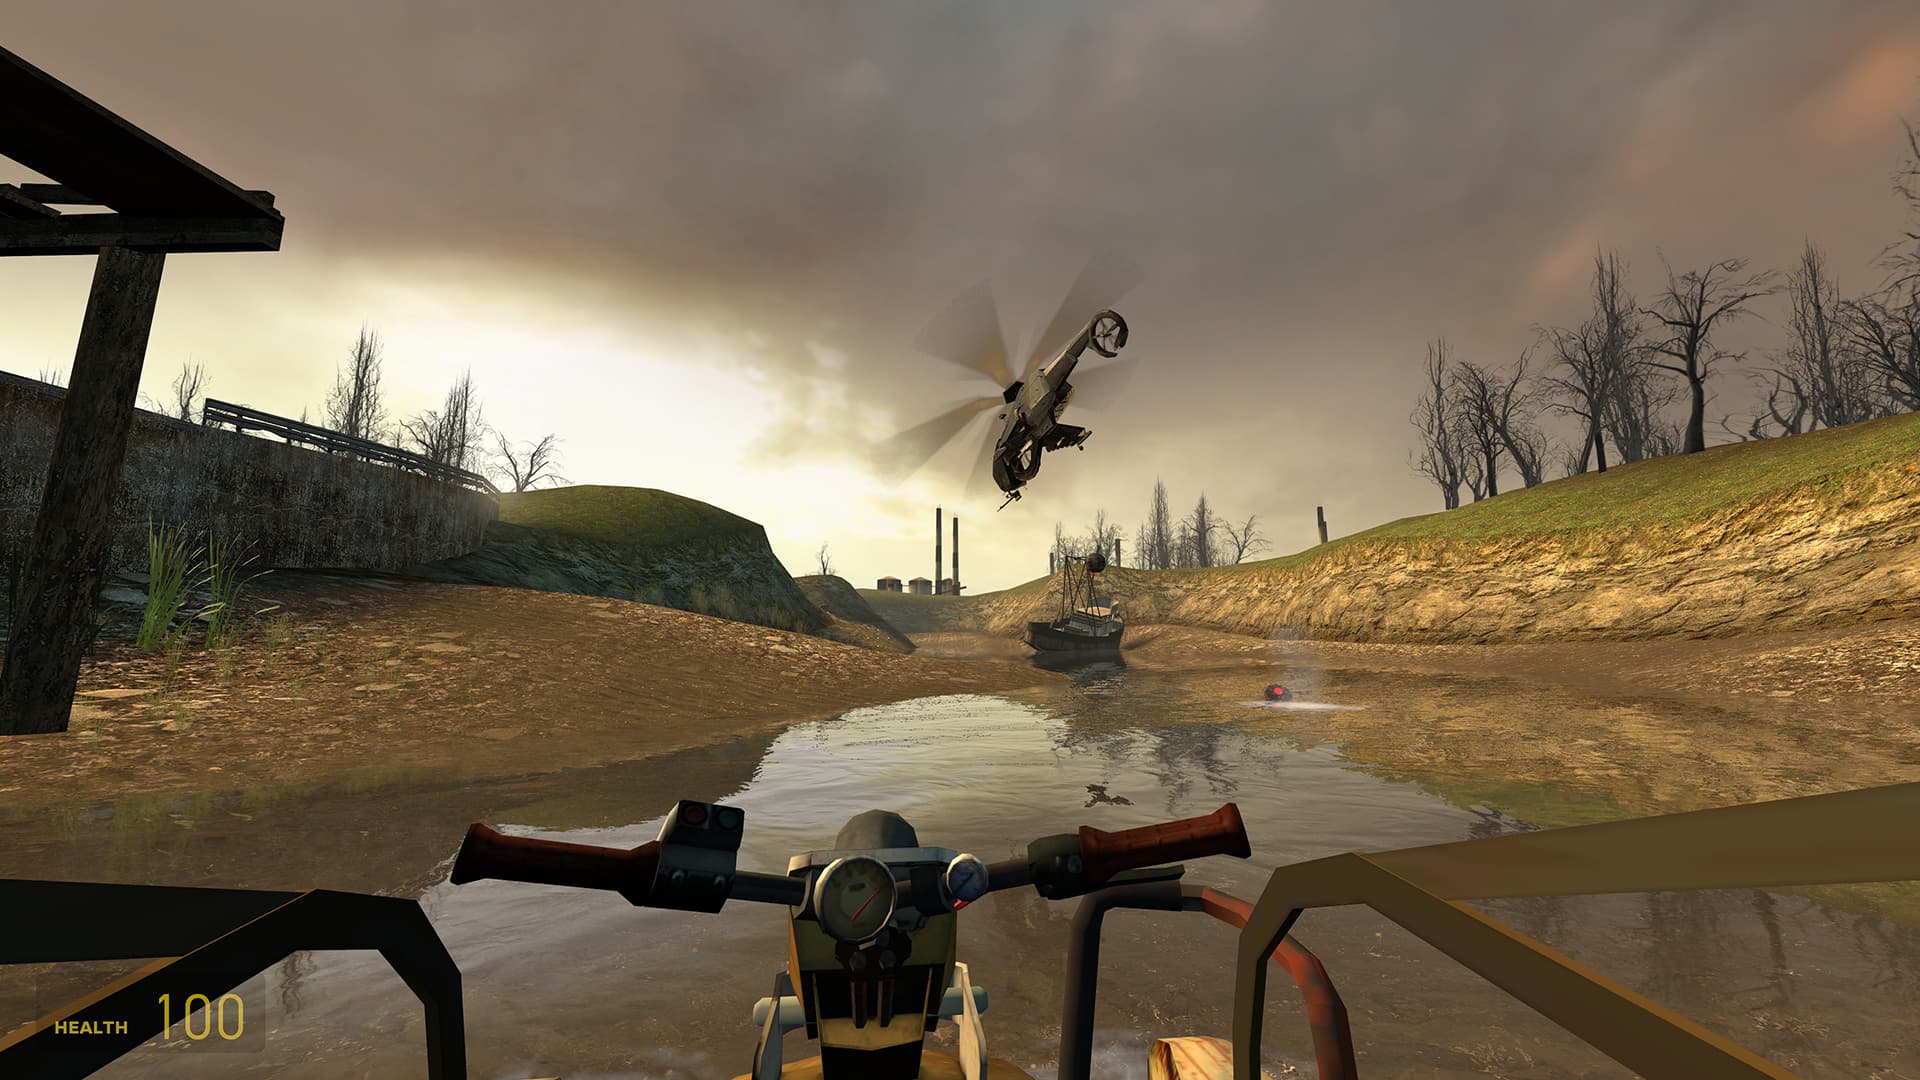 A screenshot from Half-Life 2. The player, piloting an airboat, traverses the canals as a Combine Hunter-Chopper drops mines in front of them.